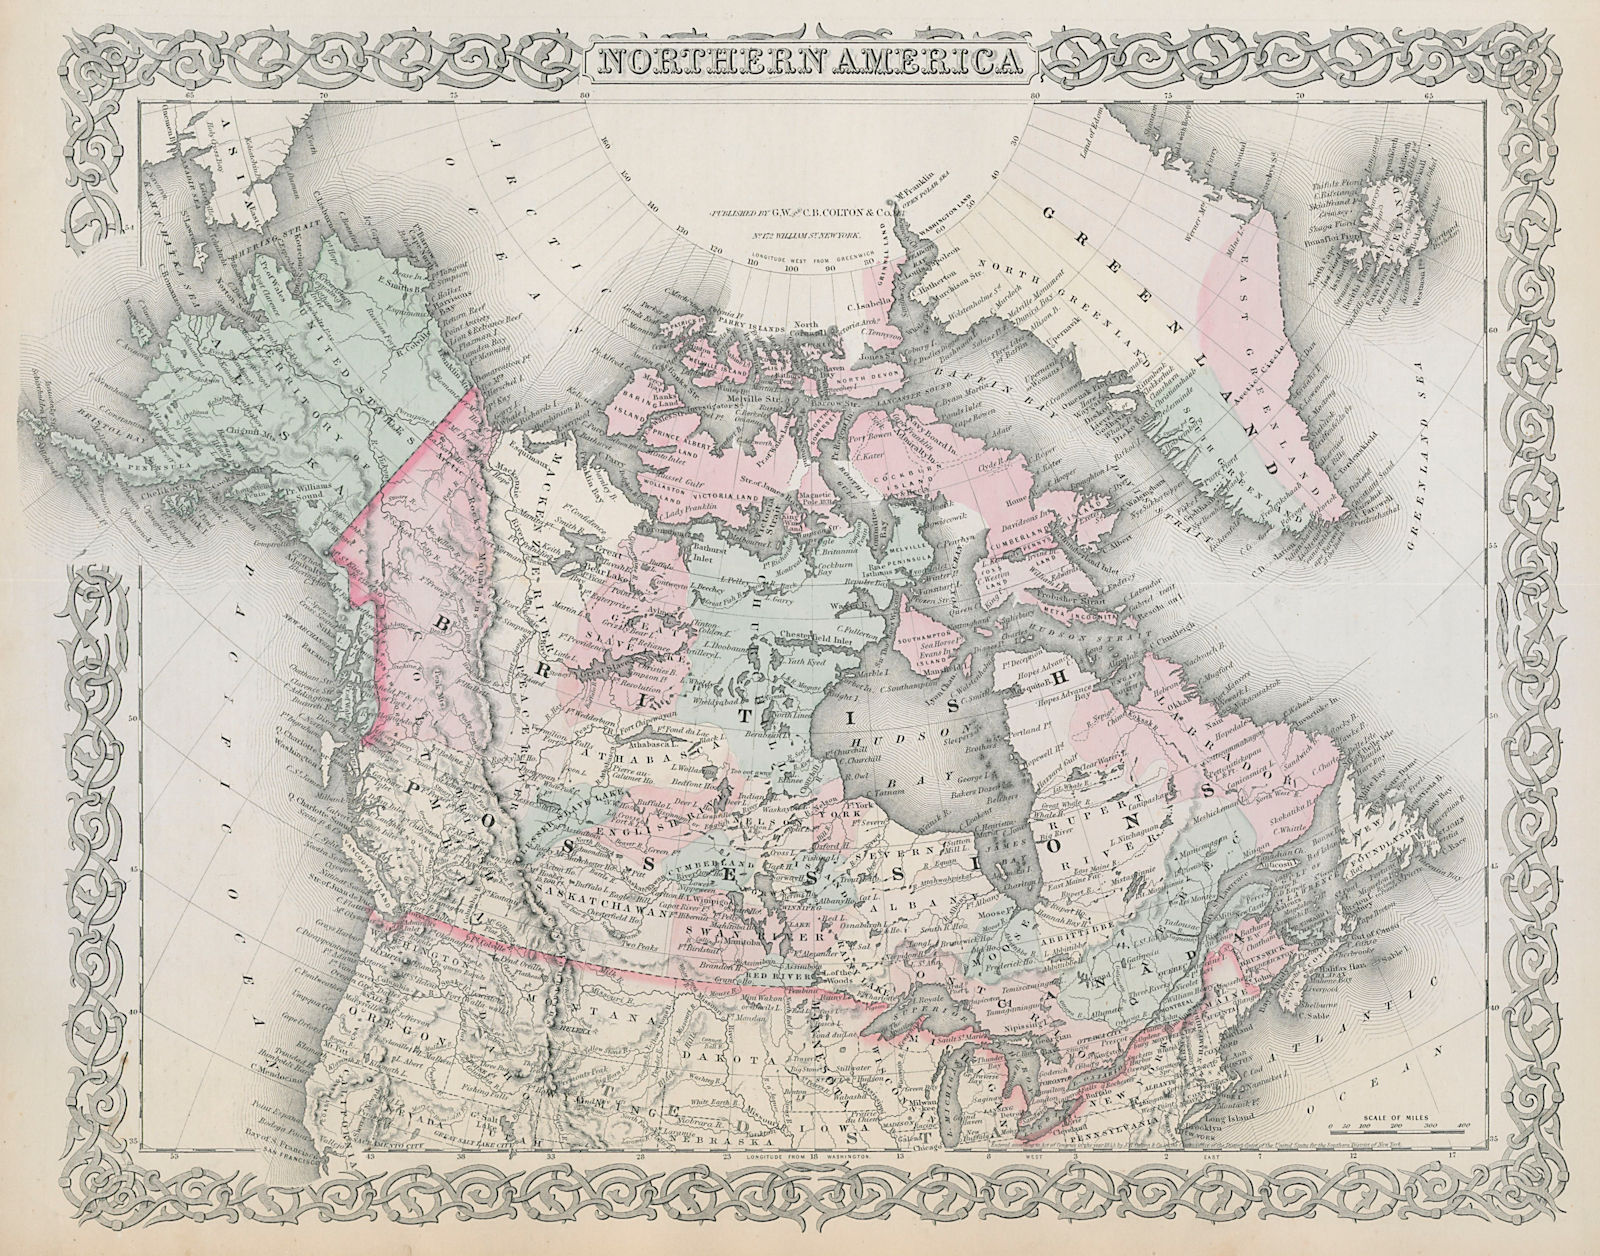 Associate Product "Northern America". Canada. River basins. Alaska purchase. COLTON 1869 old map